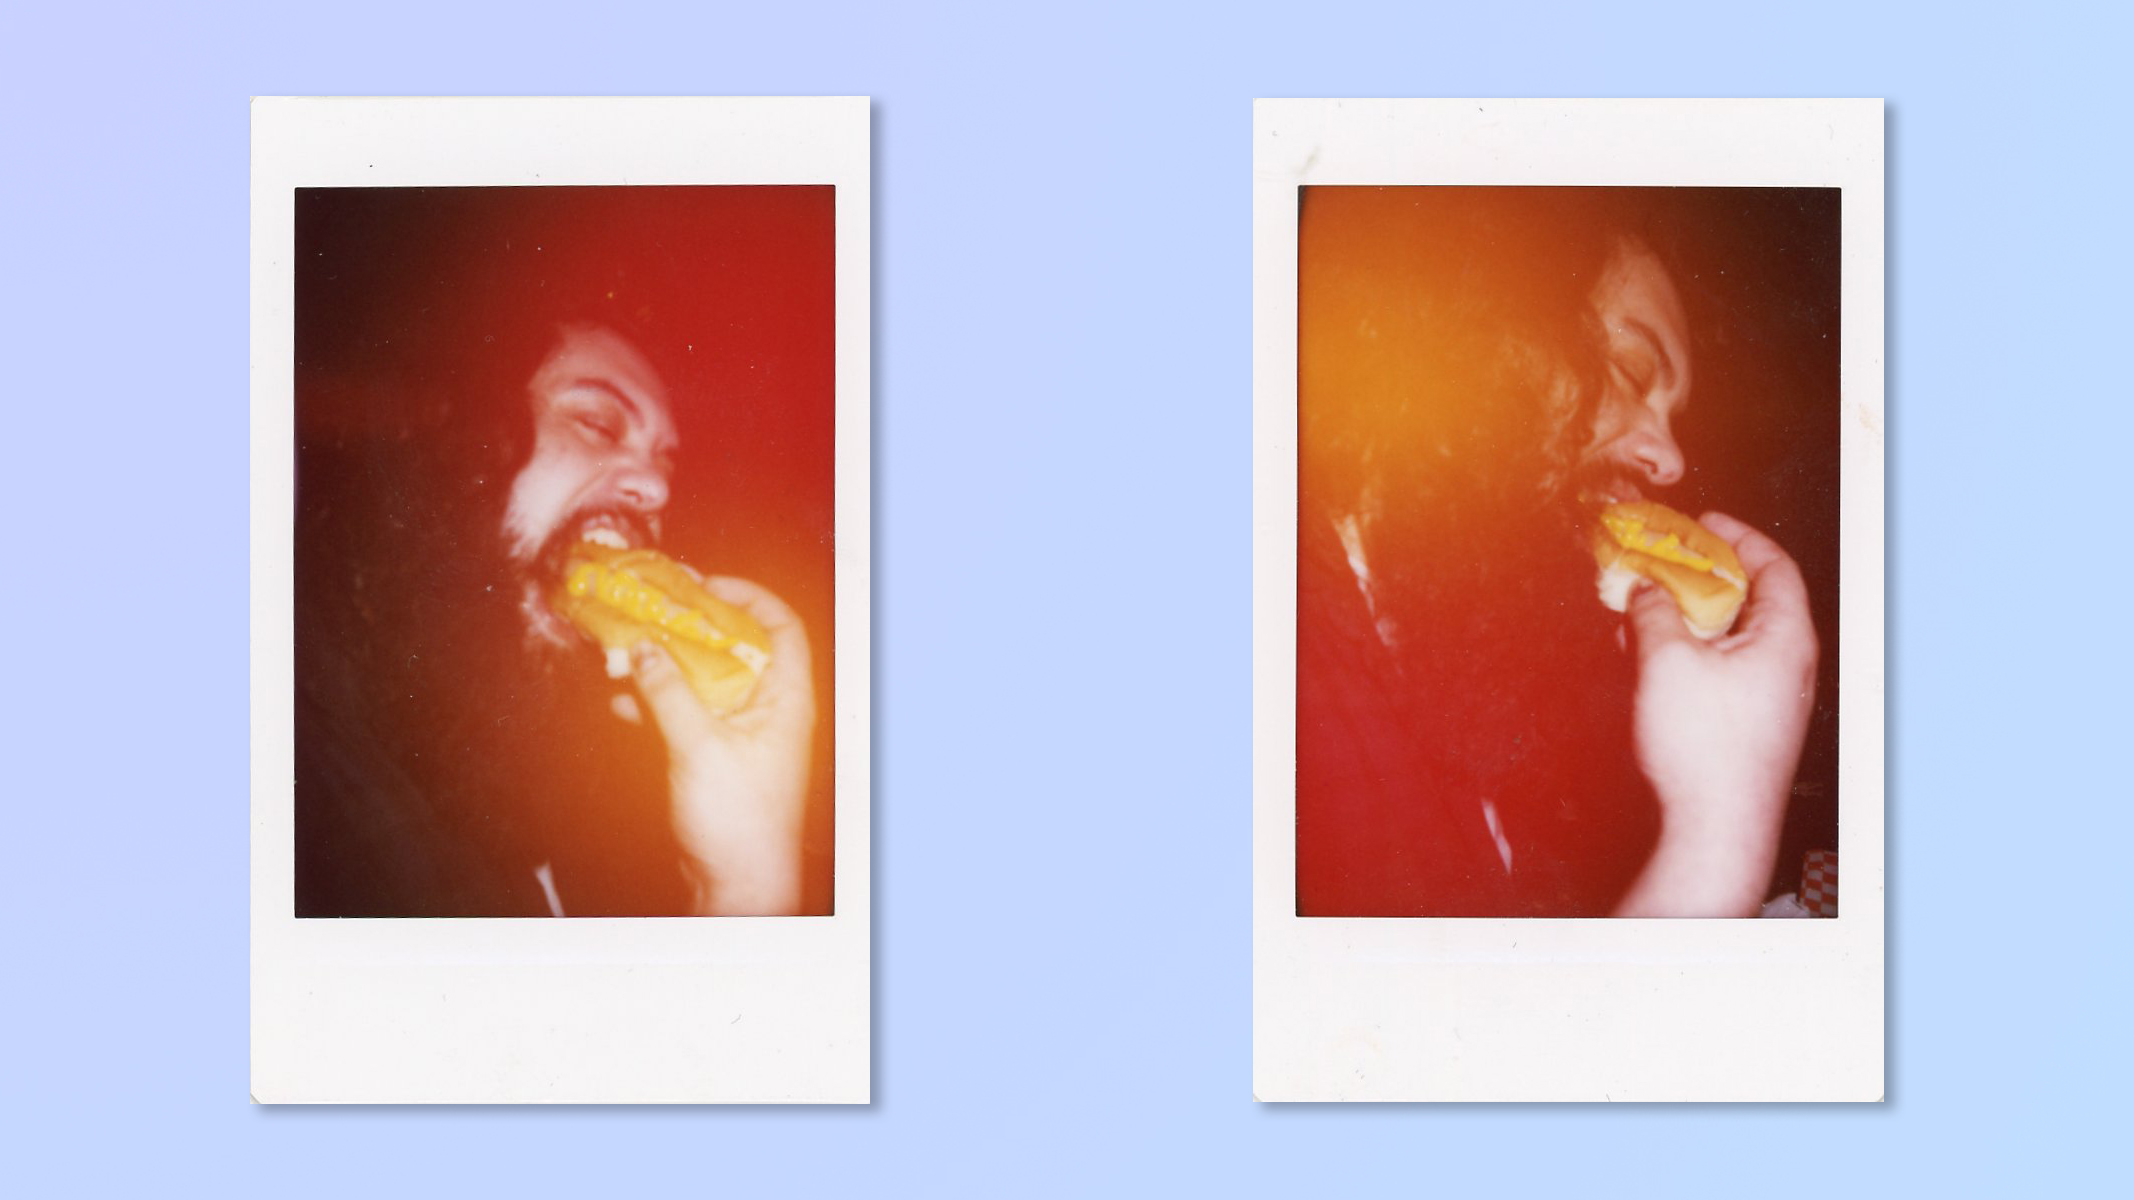 Two Instax photo prints of a man eating a hotdog, scanned and overlaid on a blue background. All taken on a Fujifilm Instax mini 99 showing Light Leak filters.